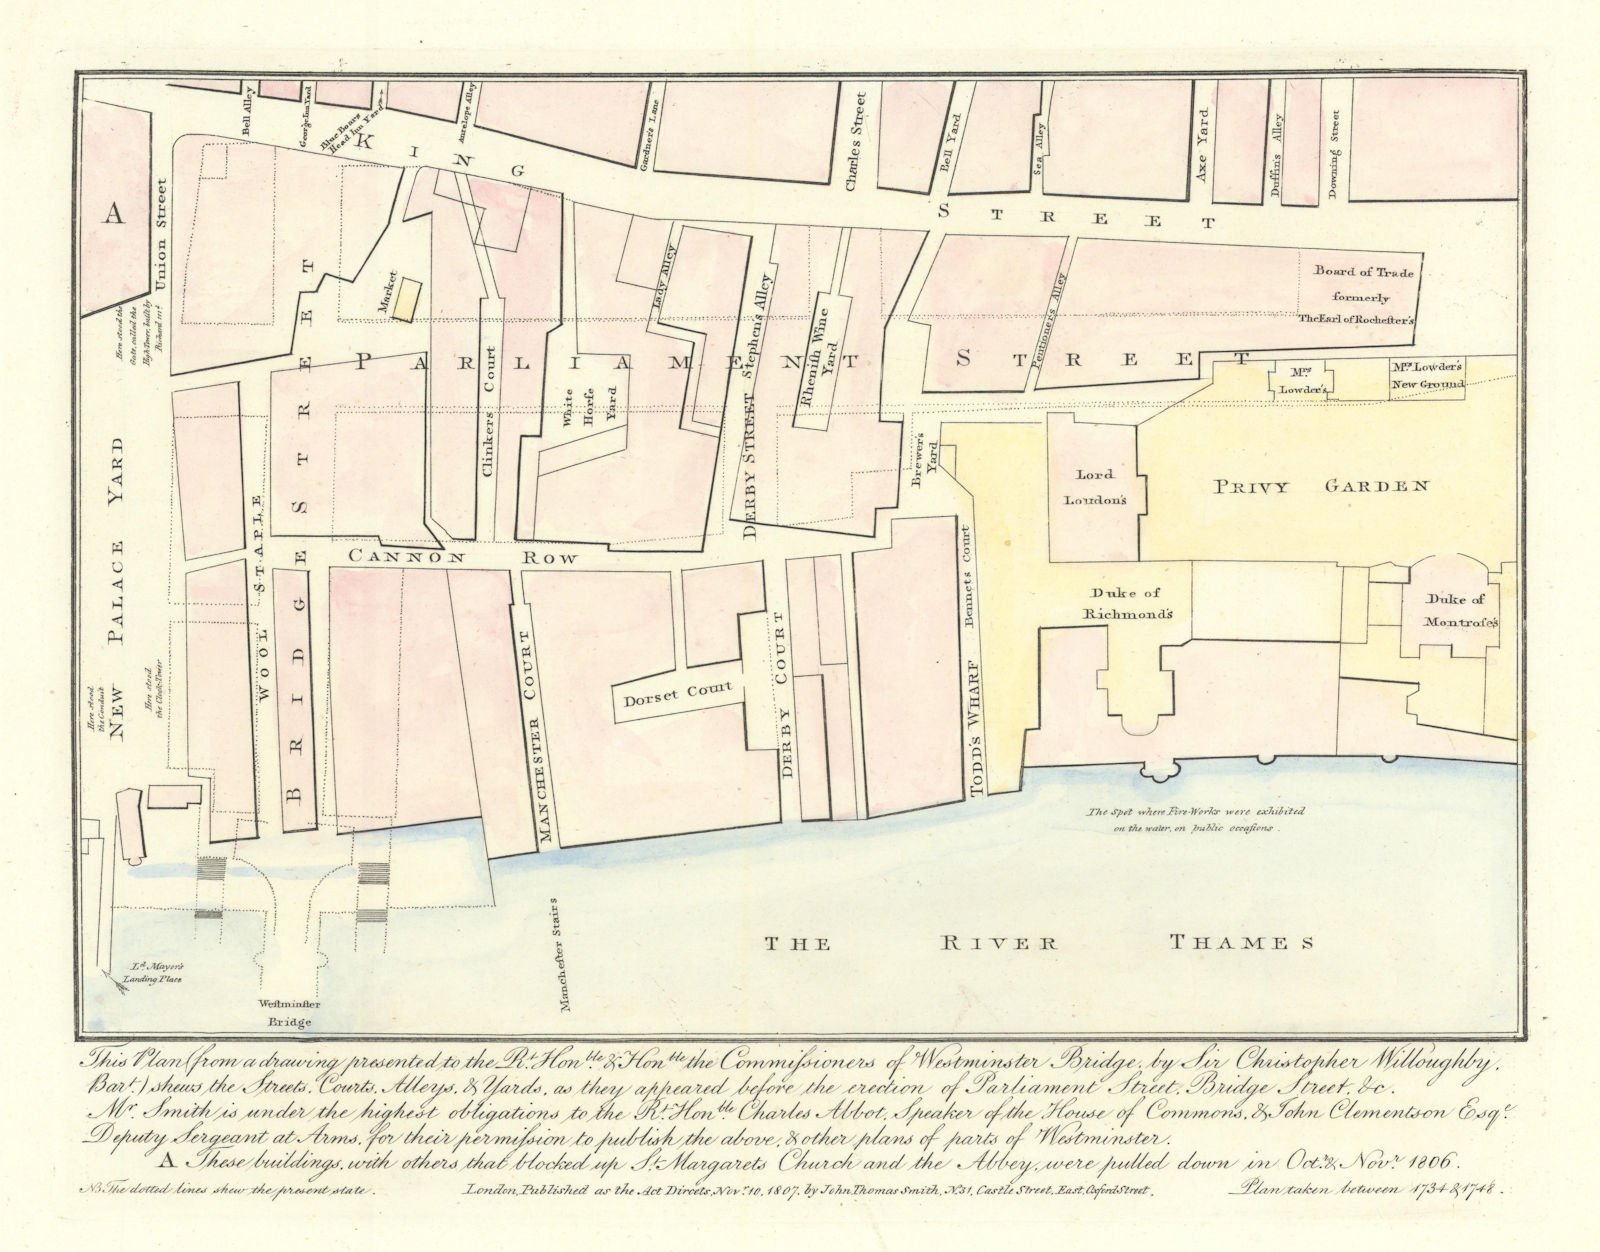 Associate Product Westminster in 1734 before Parliament & Bridge Streets. J.T. SMITH 1807 map